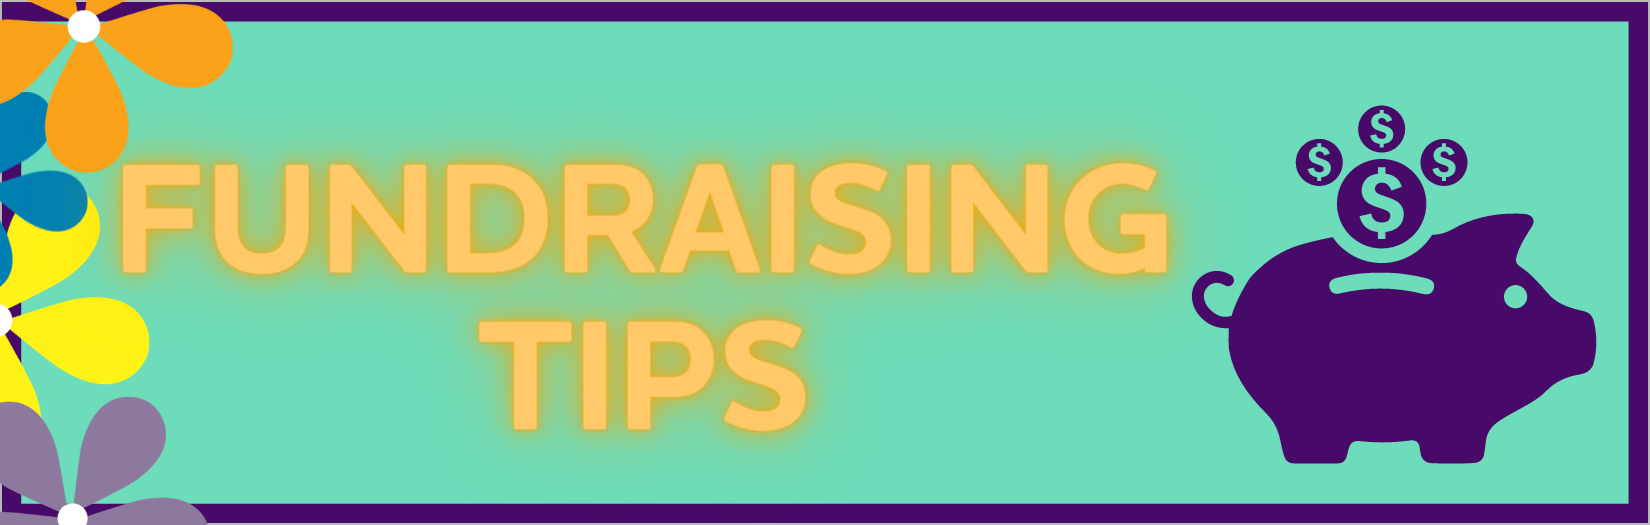 Fundraising Tips Button